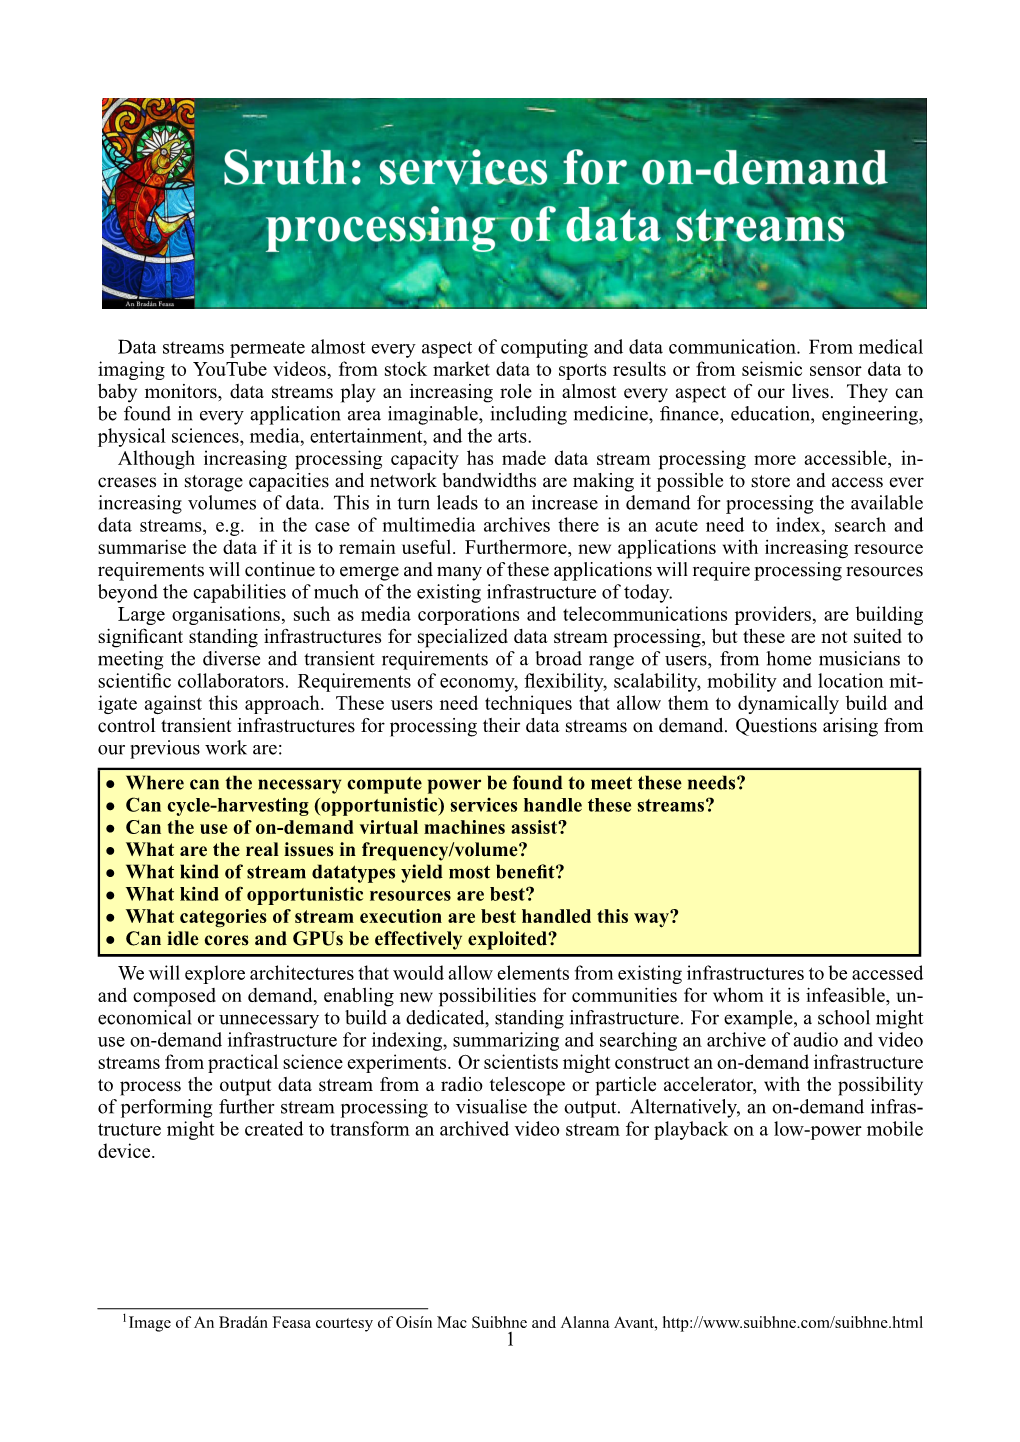 Data Streams Permeate Almost Every Aspect of Computing and Data Communication